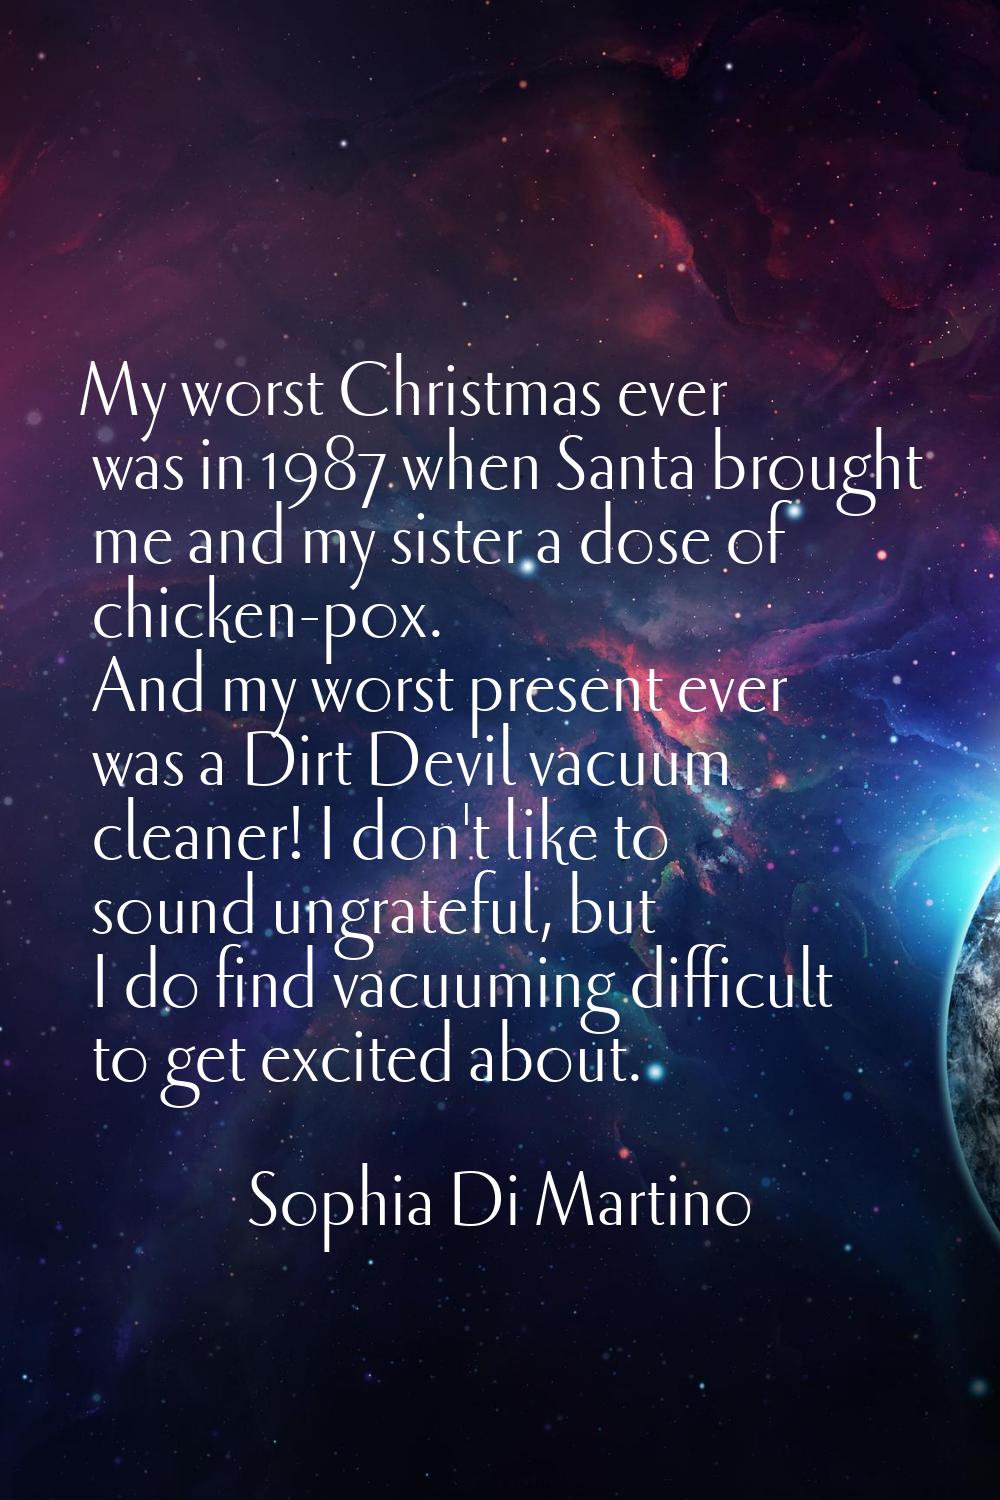 My worst Christmas ever was in 1987 when Santa brought me and my sister a dose of chicken-pox. And 